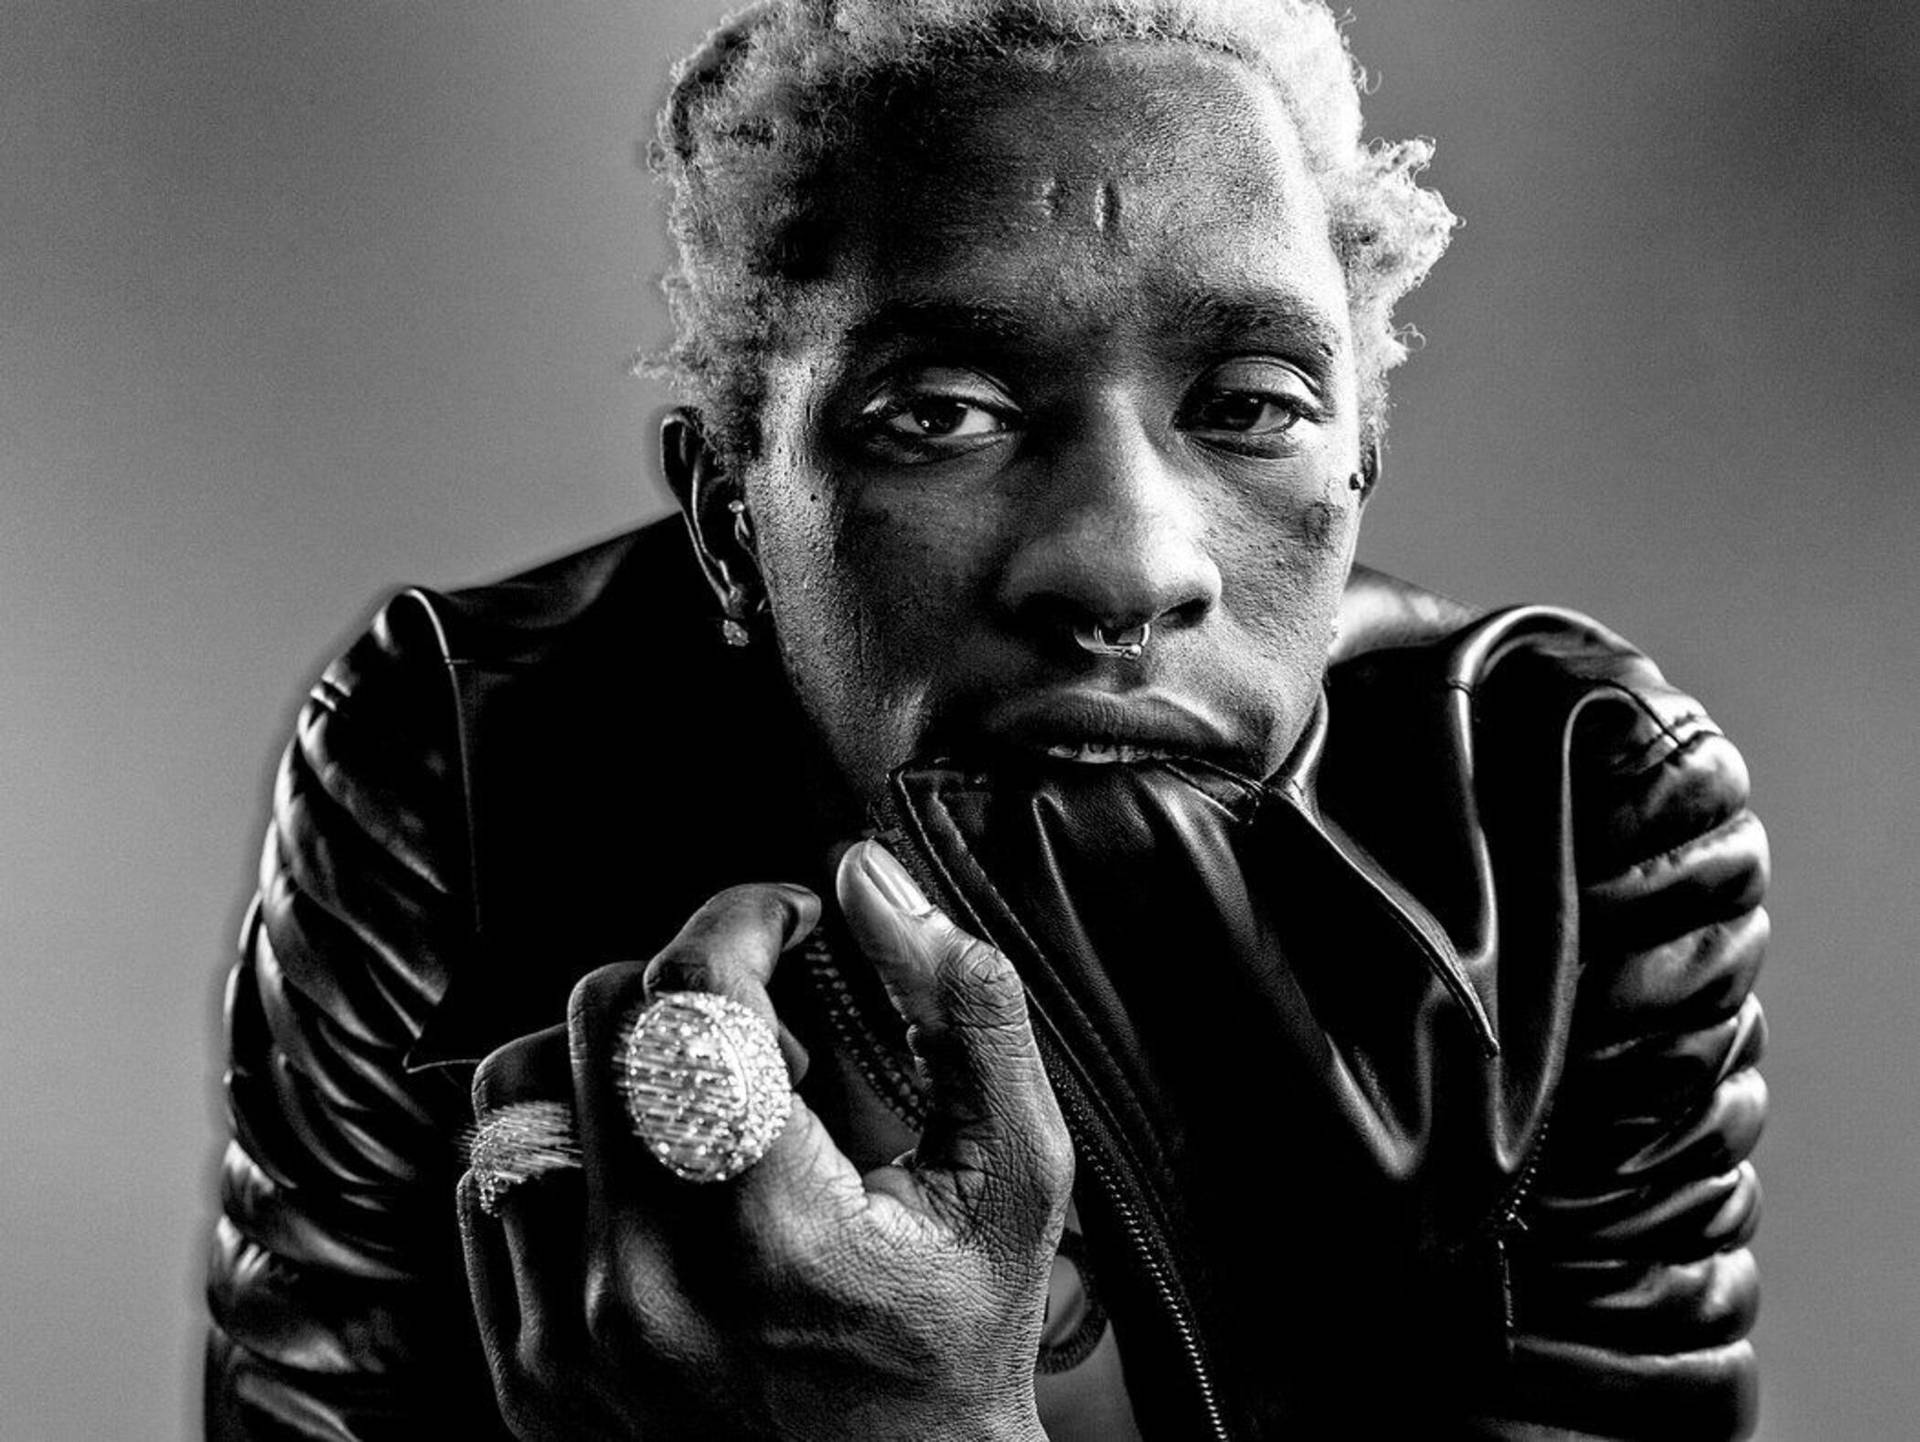 Dynamic Rapper Young Thug Photoshoot For Fans Background